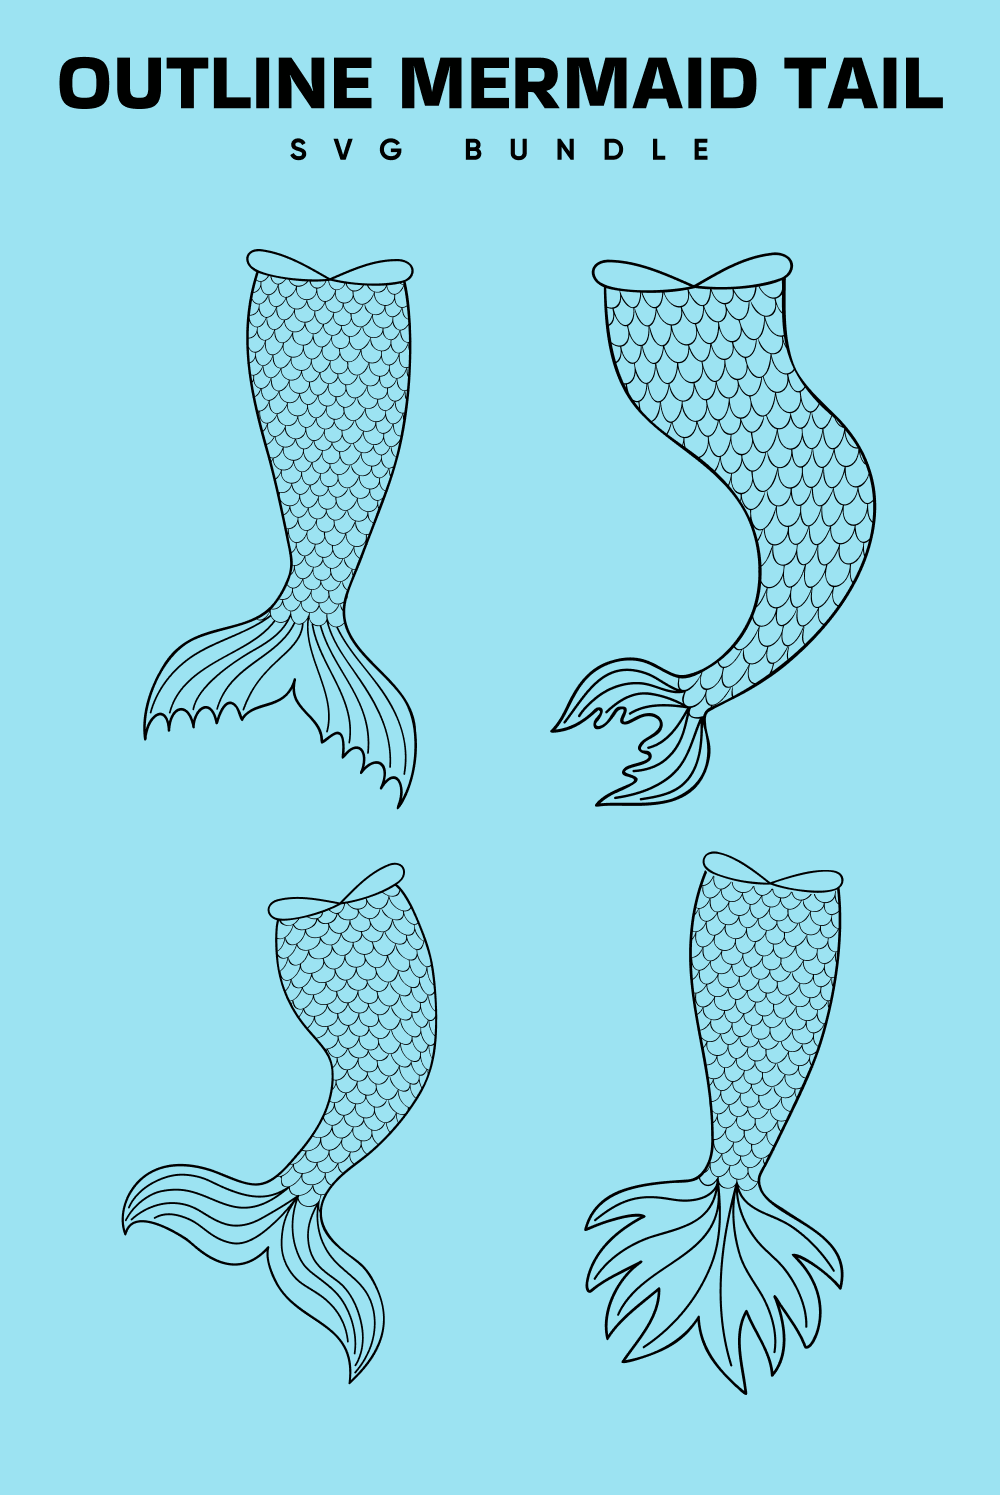 Outline of a mermaid's tail with drawn scales.